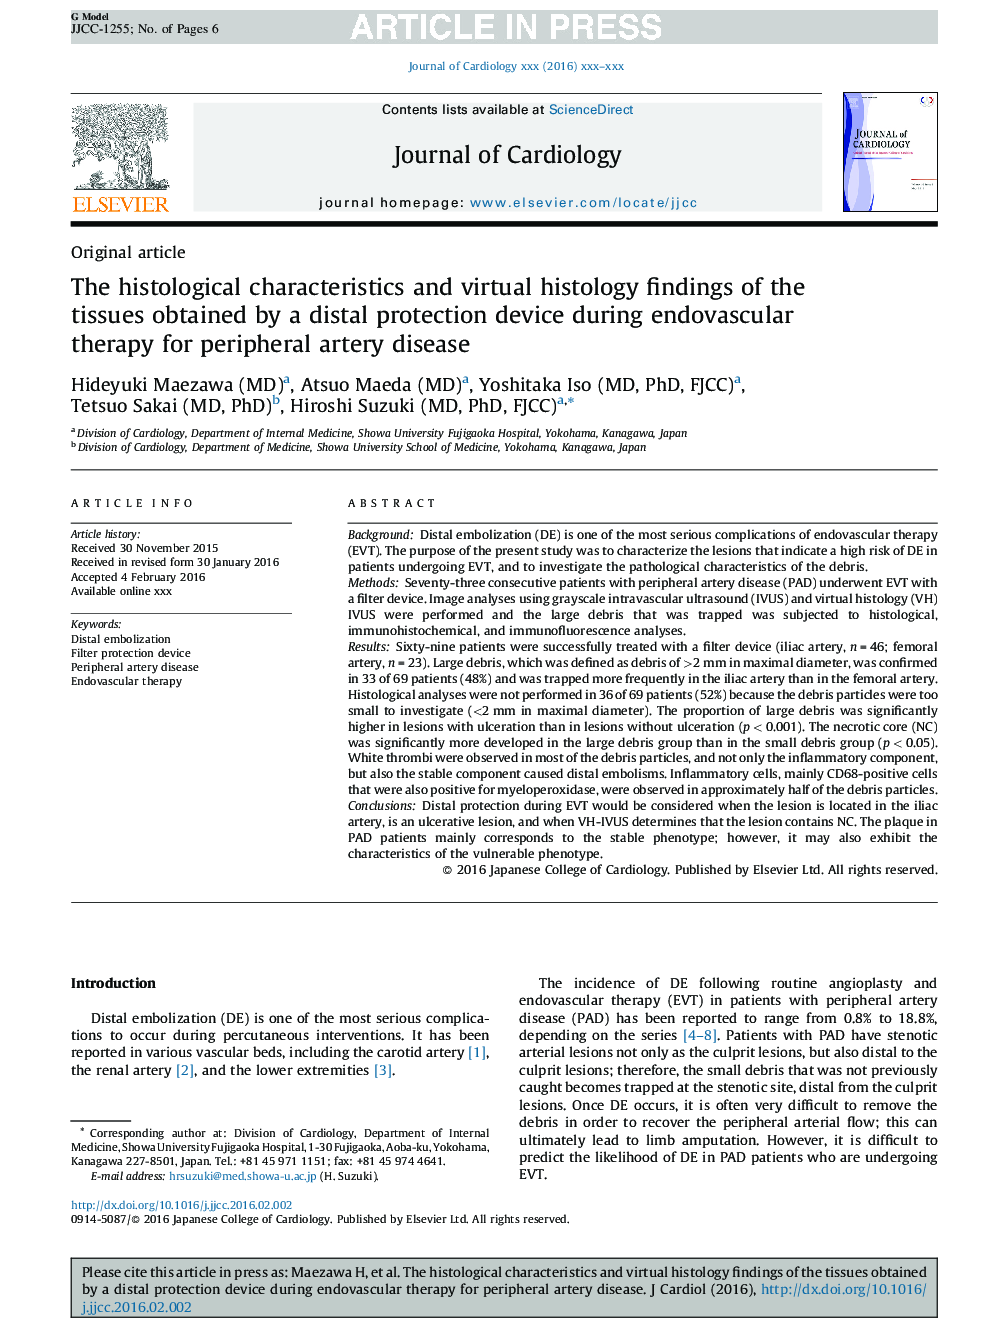 The histological characteristics and virtual histology findings of the tissues obtained by a distal protection device during endovascular therapy for peripheral artery disease